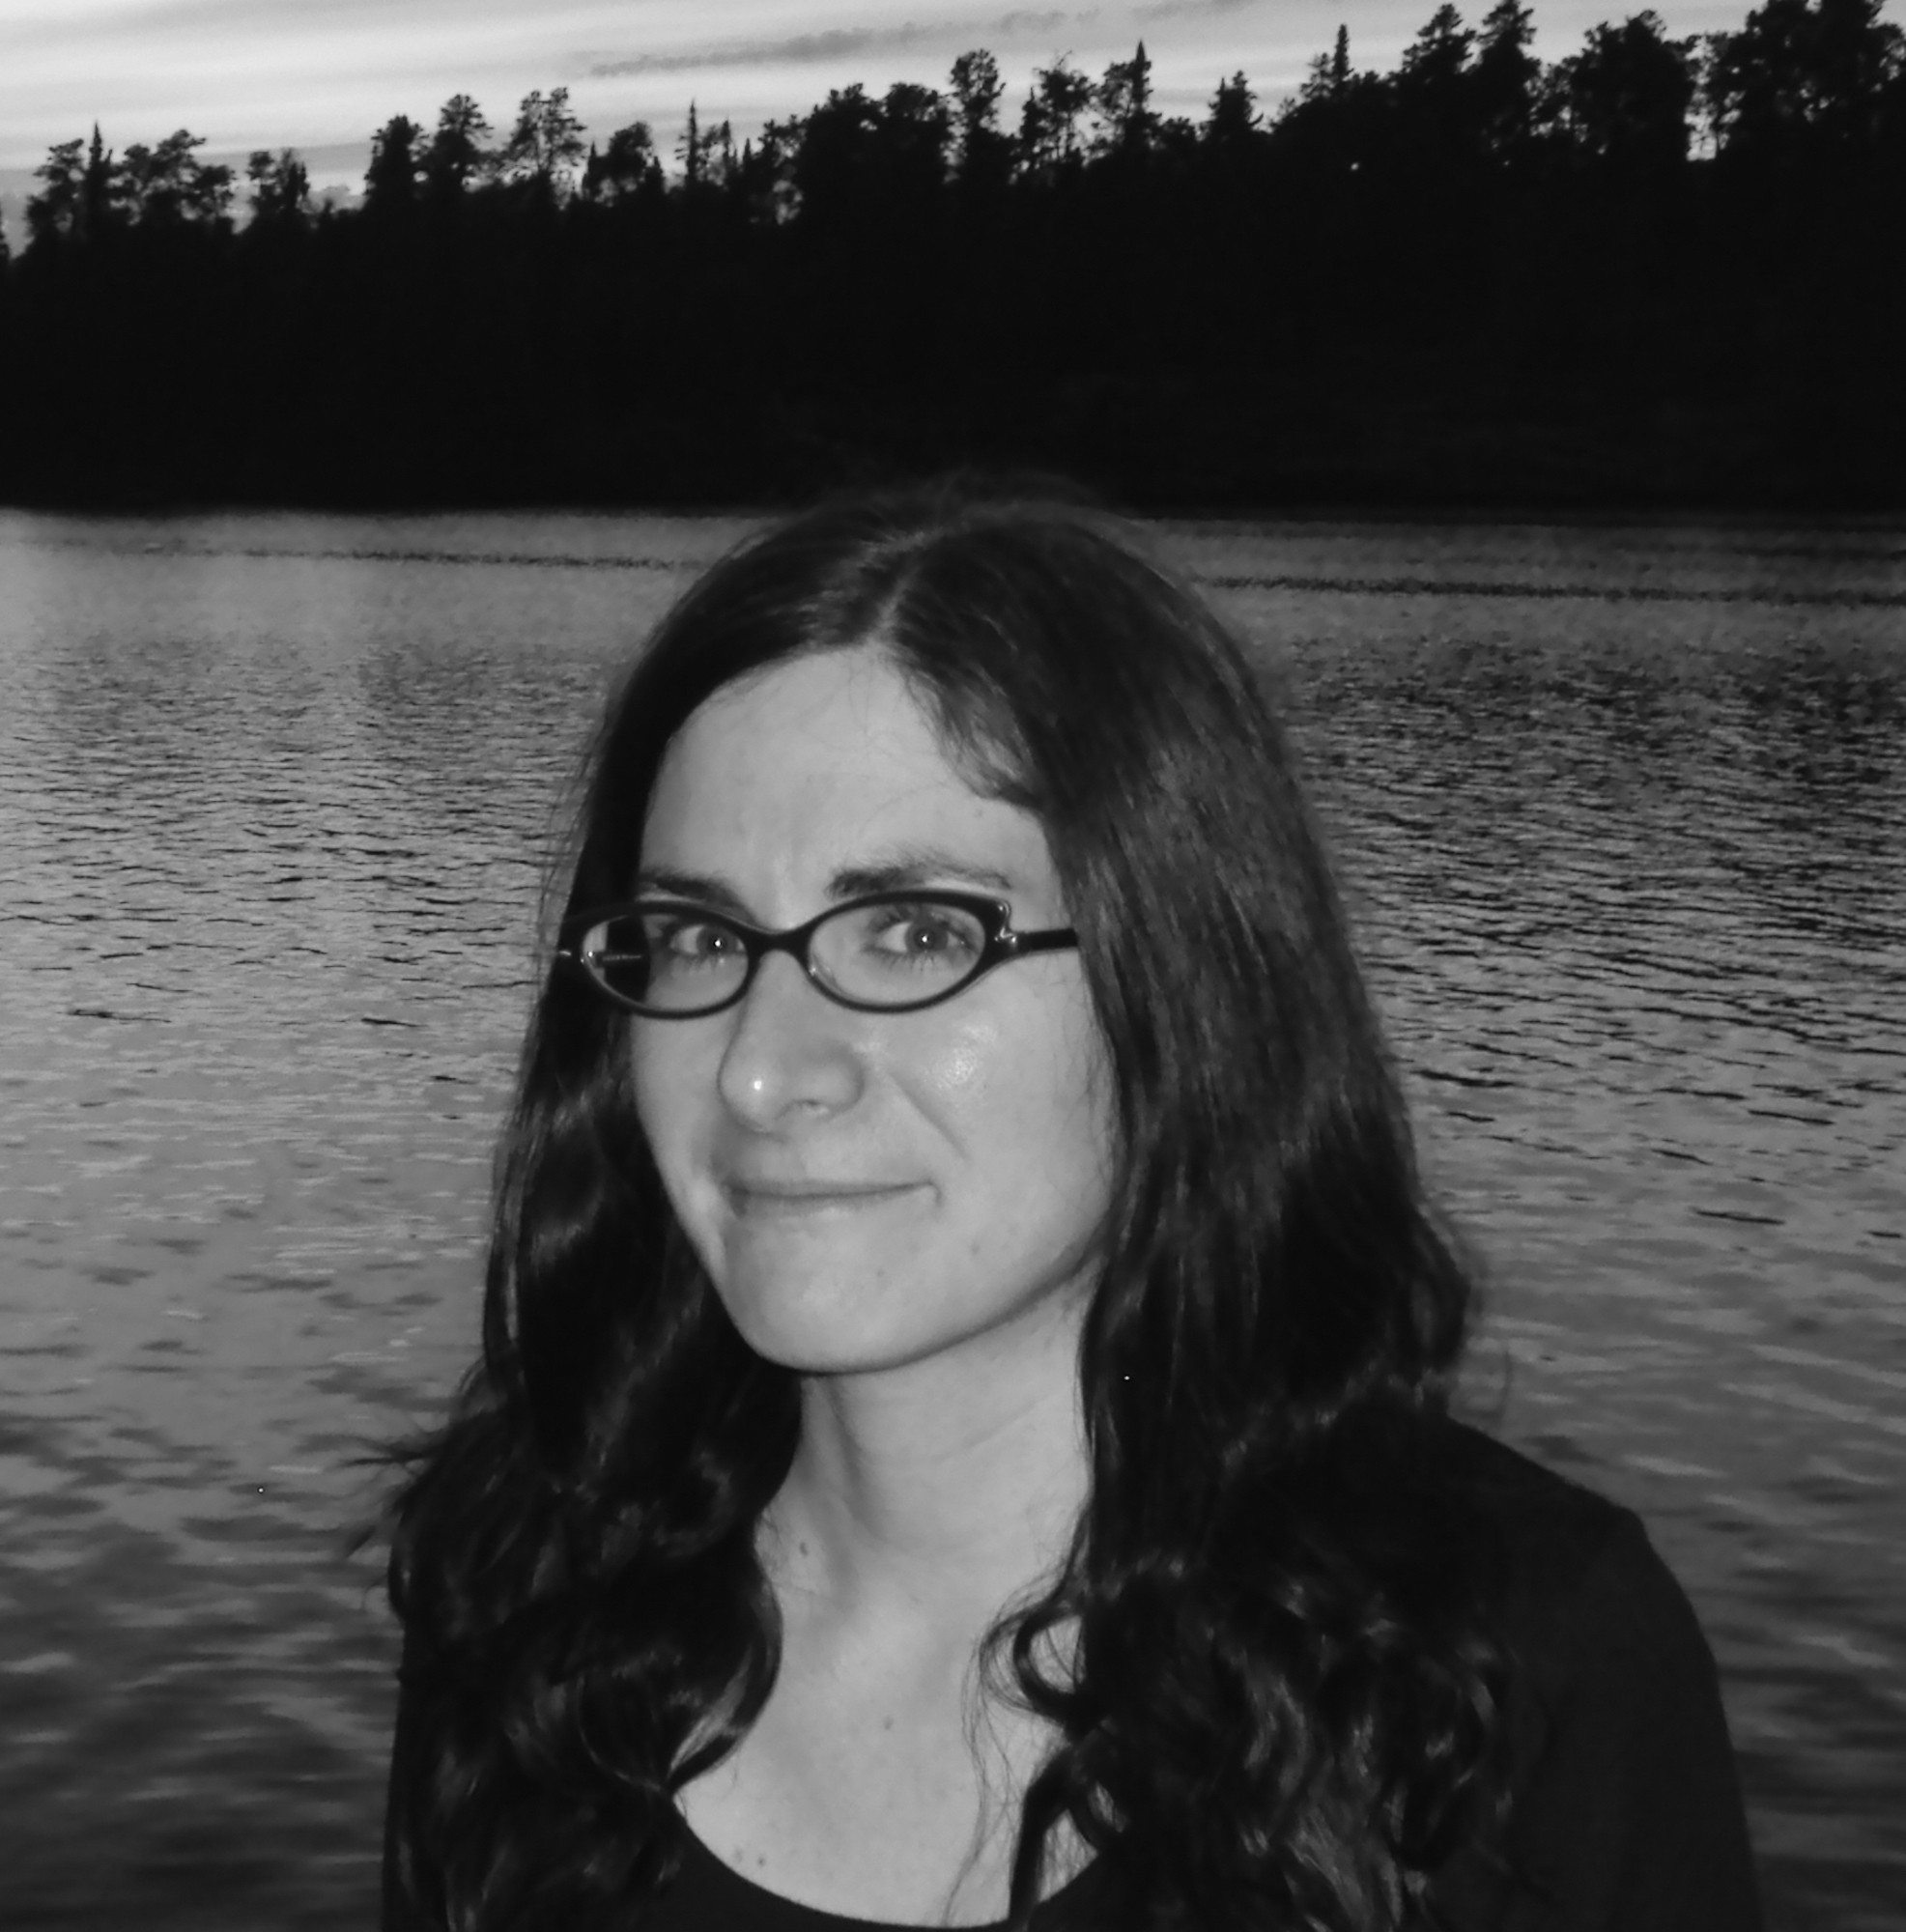 In this black and white portrait, Sylvia Matas is standing in front of a body of water, with a treeline visible on the opposite shore.